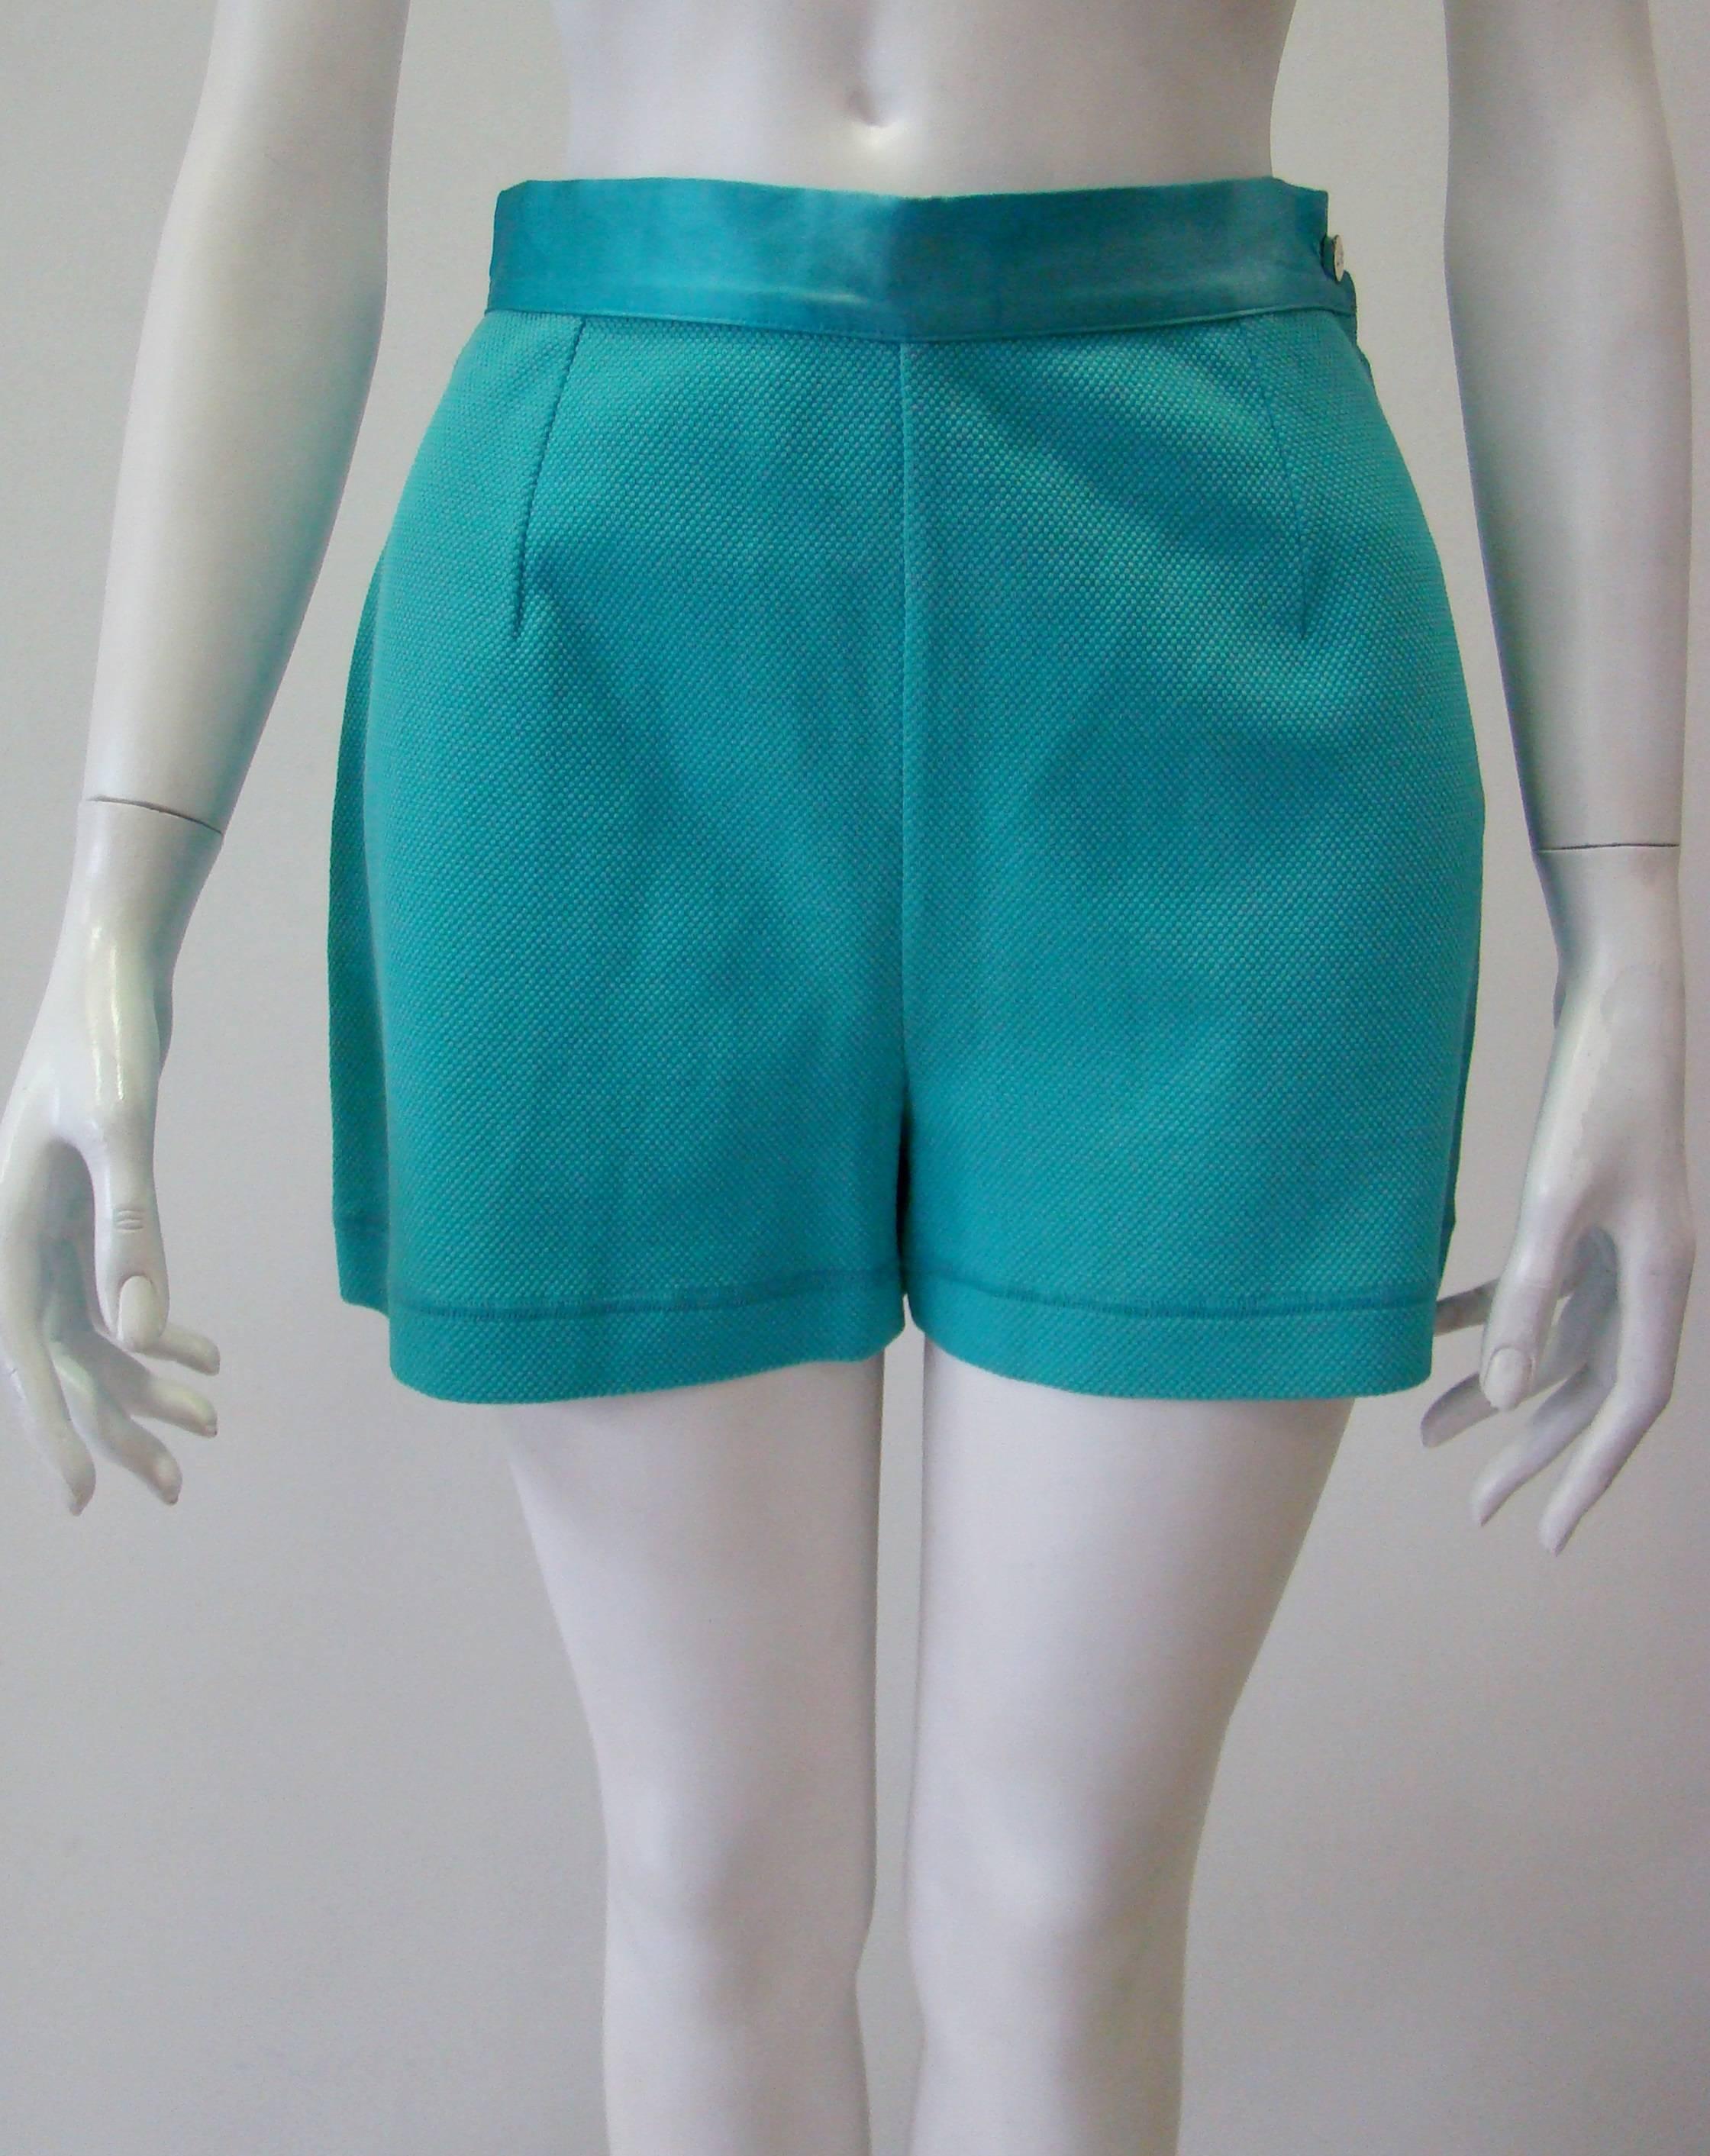 Blue Gianfranco Ferre Turquoise Shorts For Sale